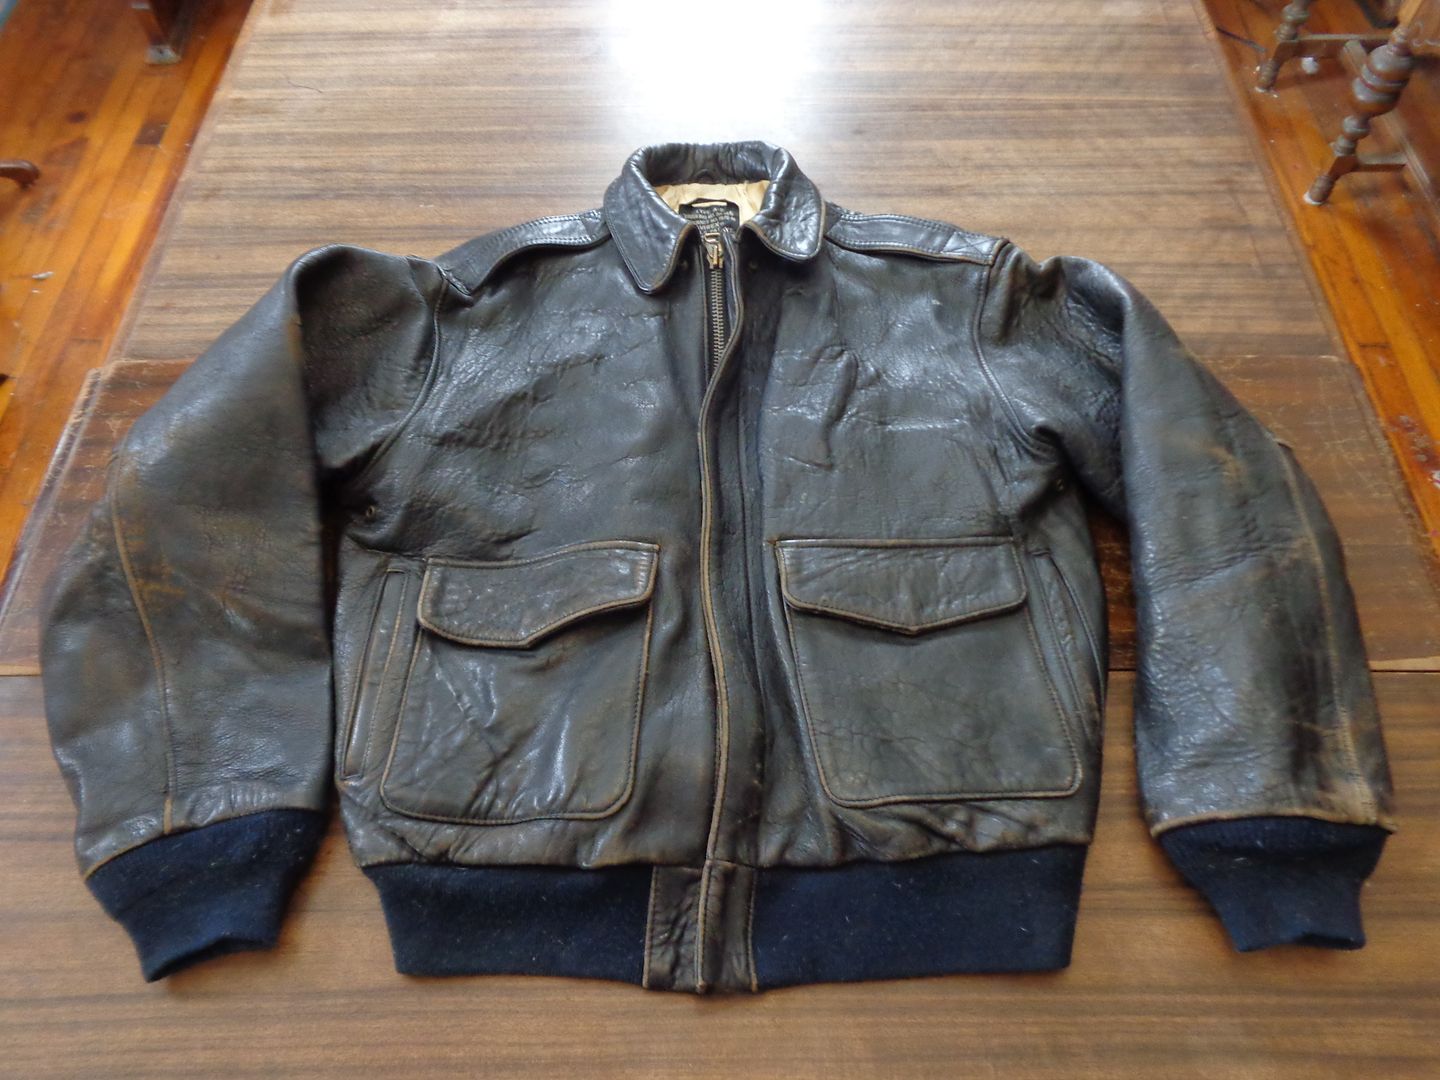 DROPS! 5 CLASSIC LEATHER JACKETS! Avirex A-2, LL Bean A-2 with